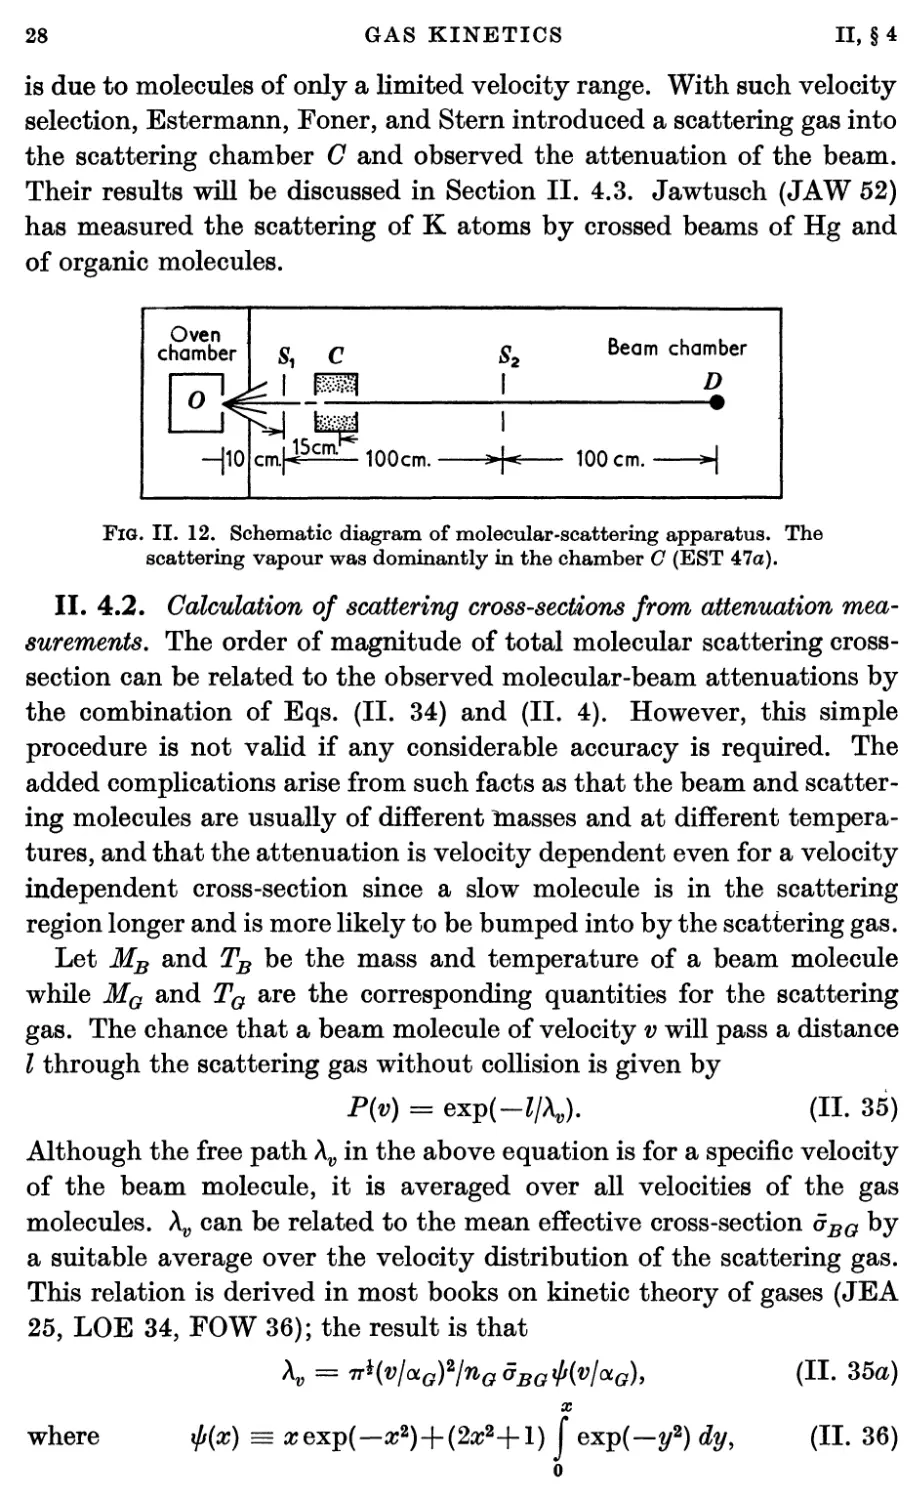 II.4.2. Calculation of scattering cross-sections from attenuation measurements